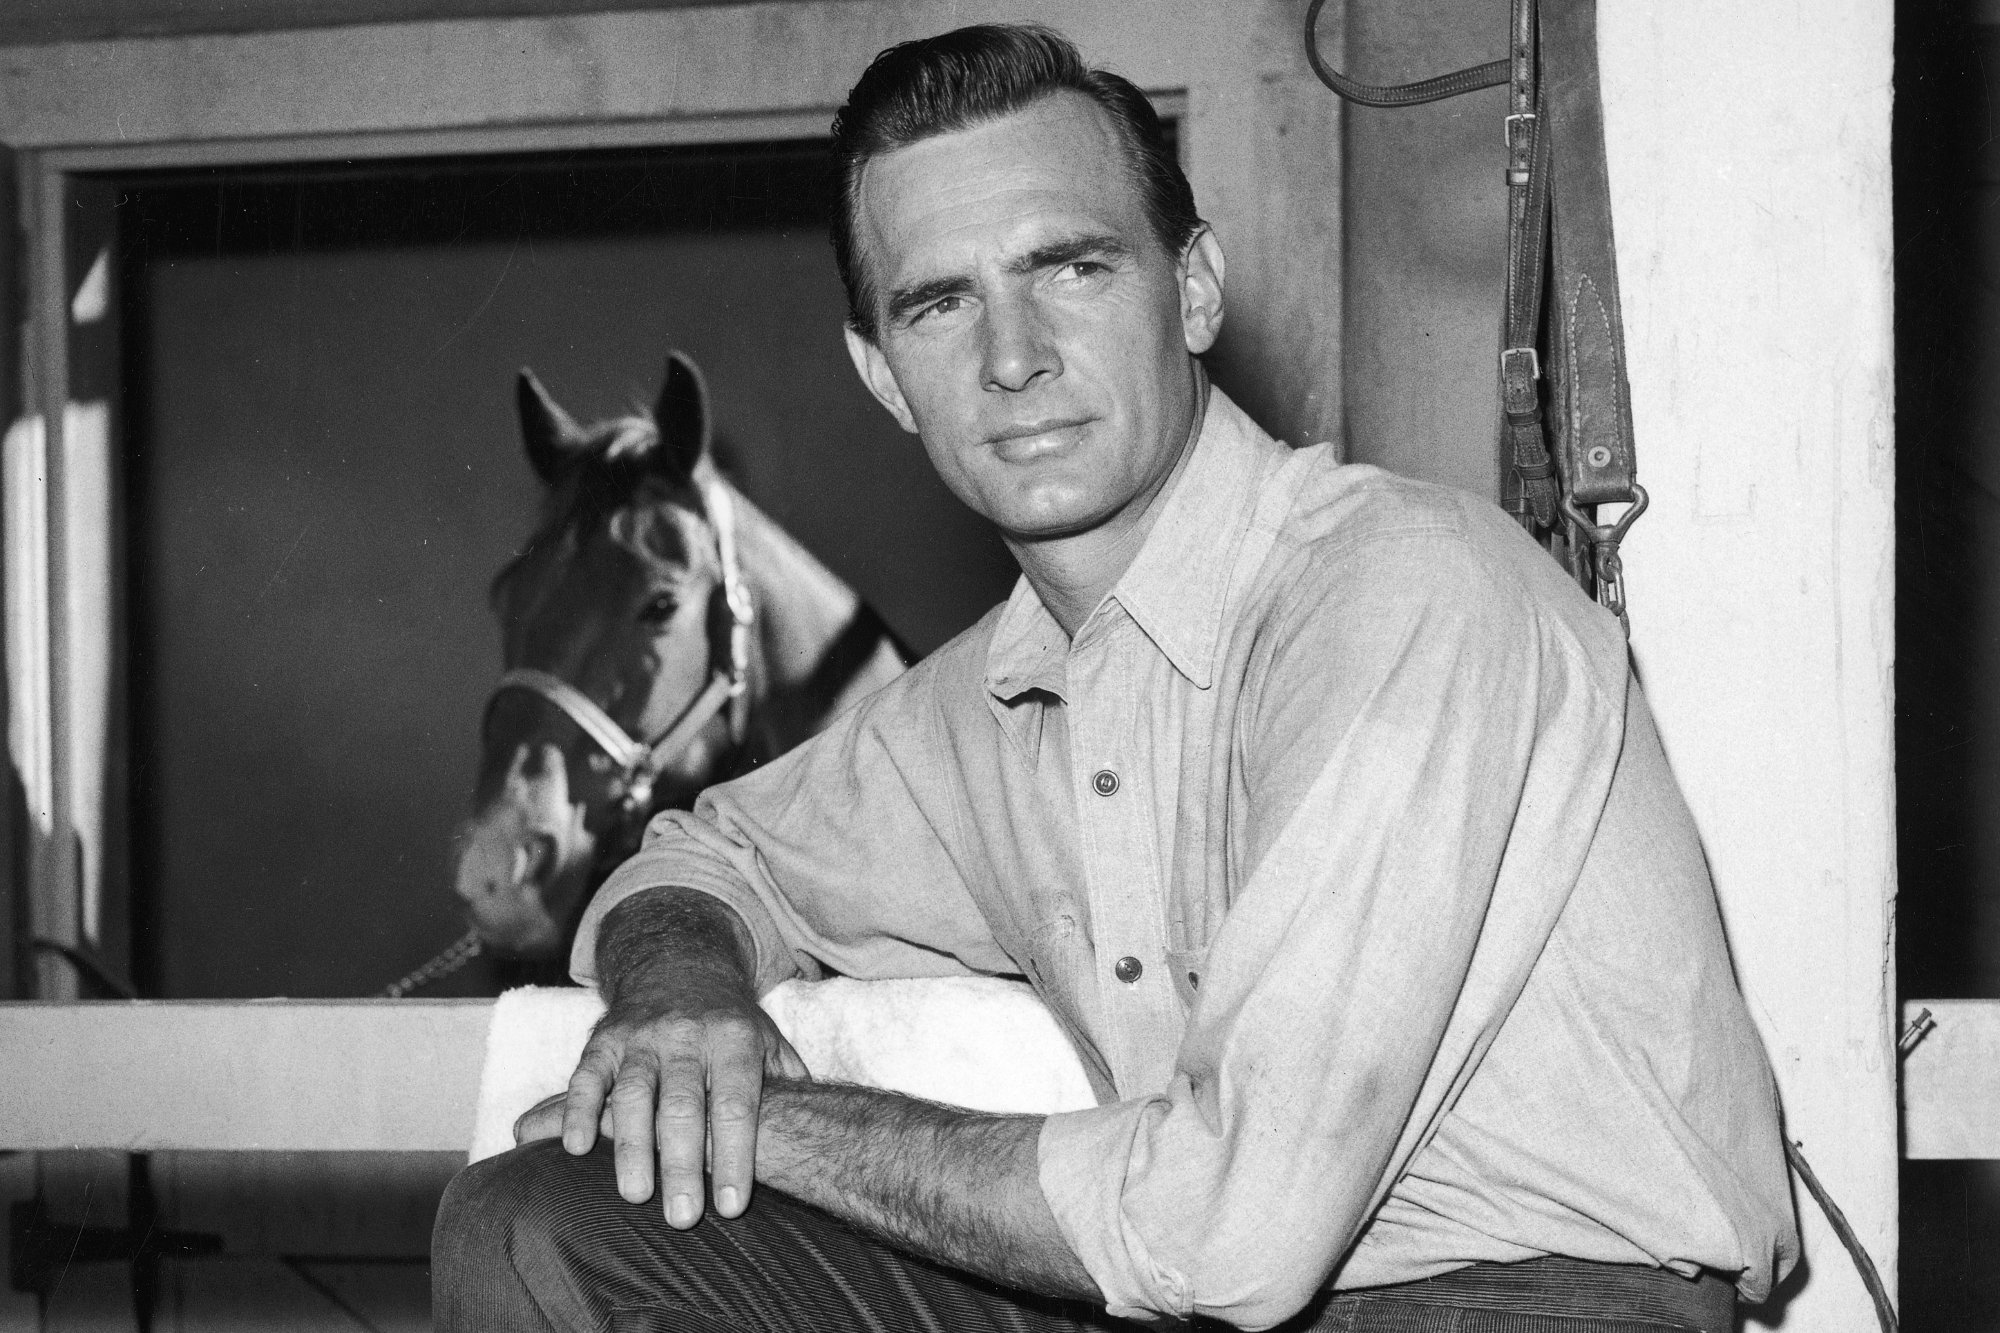 'Gunsmoke' actor Dennis Weaver wearing a collared shirt and resting his arms on a wooden gate with a horse in the background.